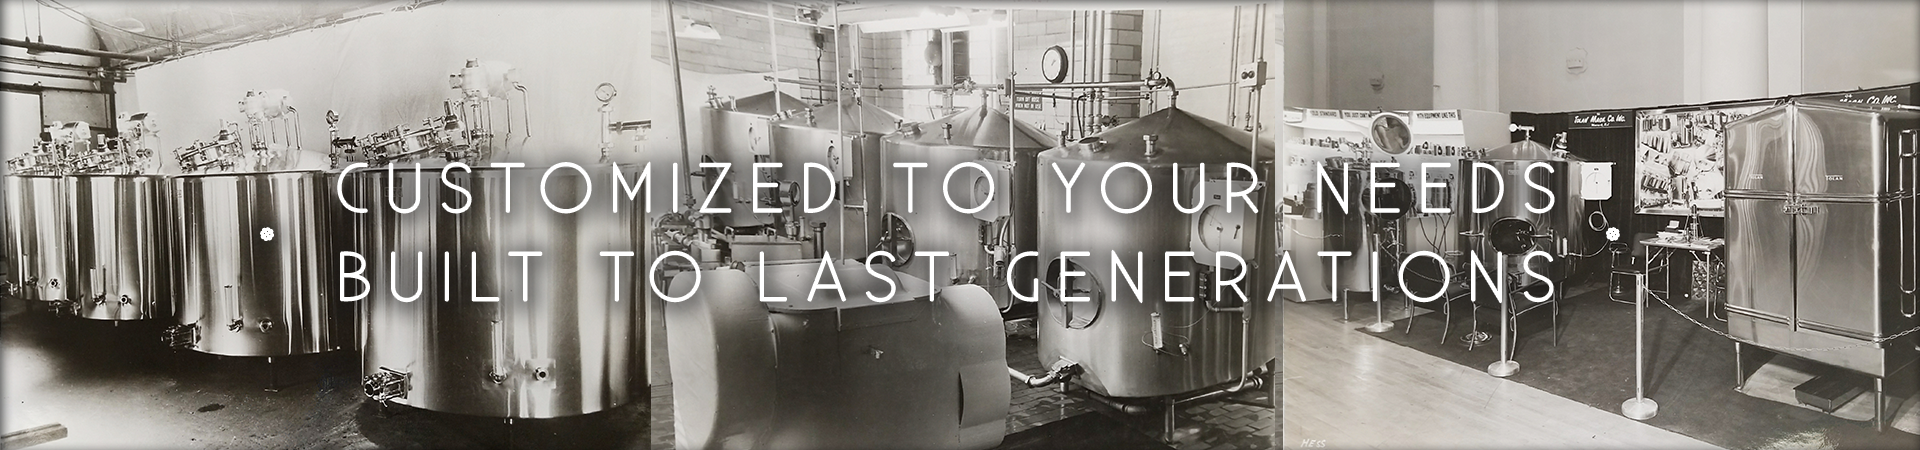 Customized to Your Needs Built to Last Generations